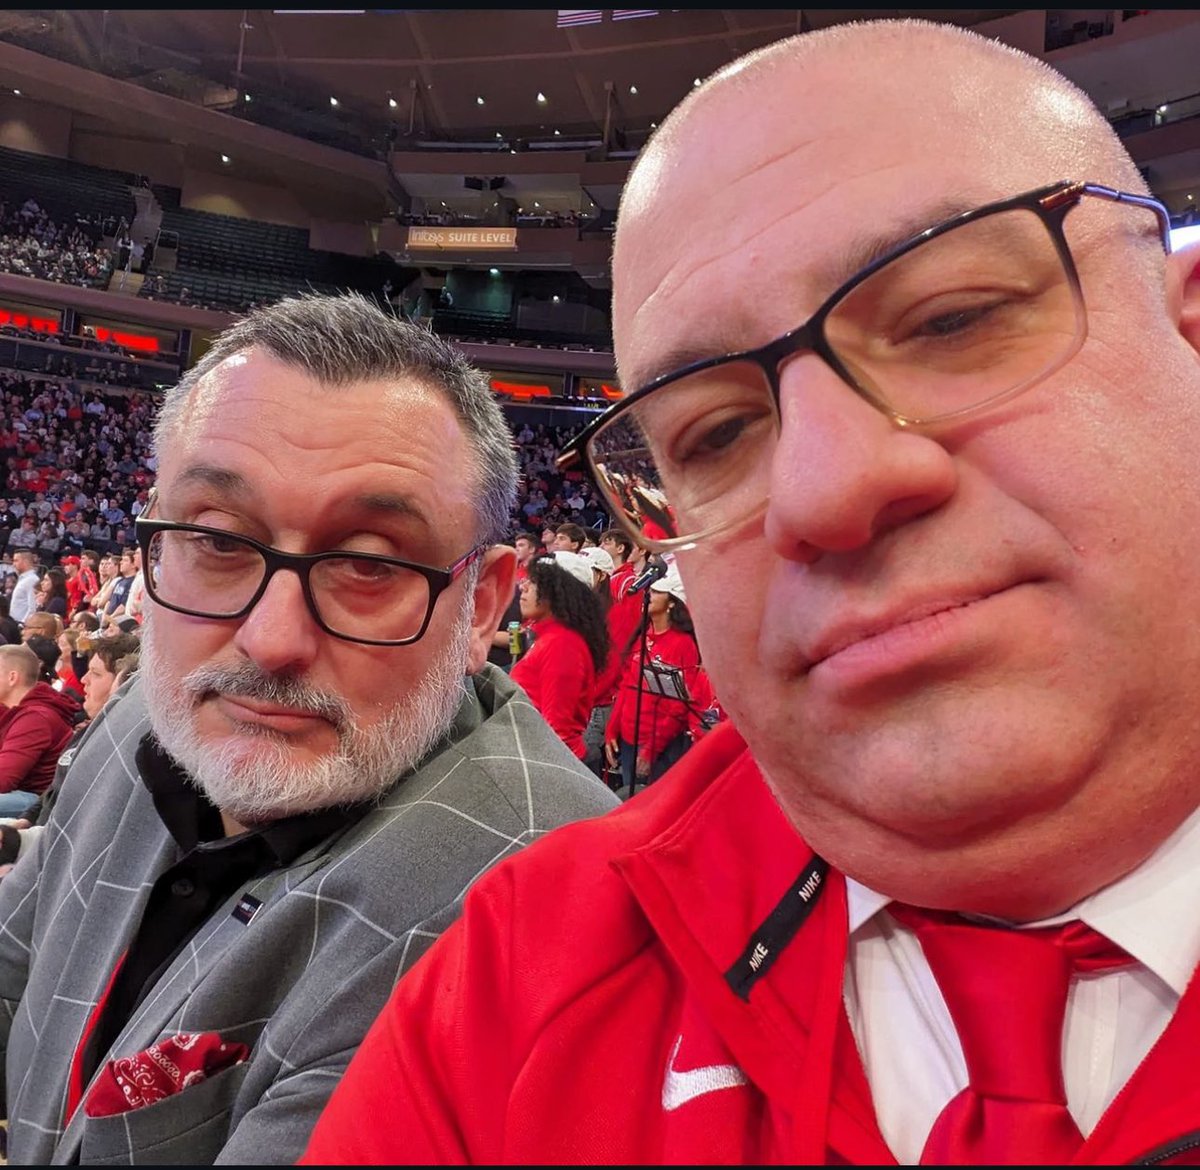 With my #stjohnsfam watching the Johnnies roll 70-50. givecampus.com/campaigns/9642…
#wearenewyorksteam #wearestjohns  #joinredwhiteclub #everygiftcounts #askmeaboutchampionpartners #johnniesunited #everygiftcounts 
#allstormnofront #stjohnstough #sjubb